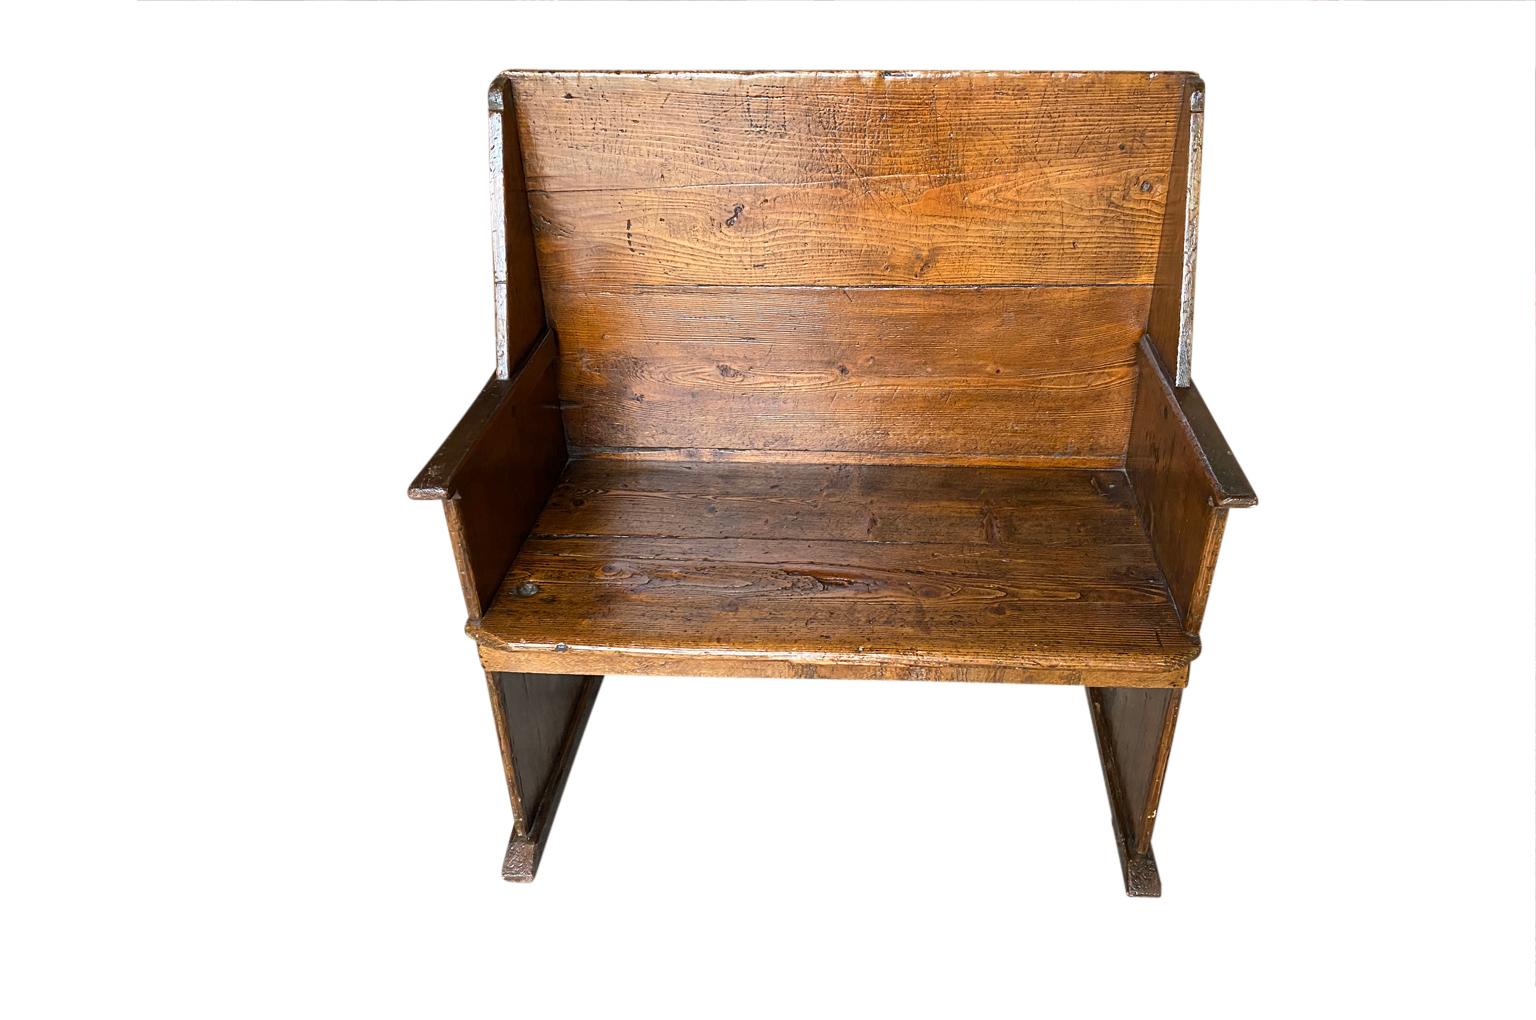 A very charming and primitive 18th century Bench from Northern Italy.  Soundly constructed from richly stained pine with a high back.  Wonderful patina.  A handsome accent piece.  The seat height is 18 3/4